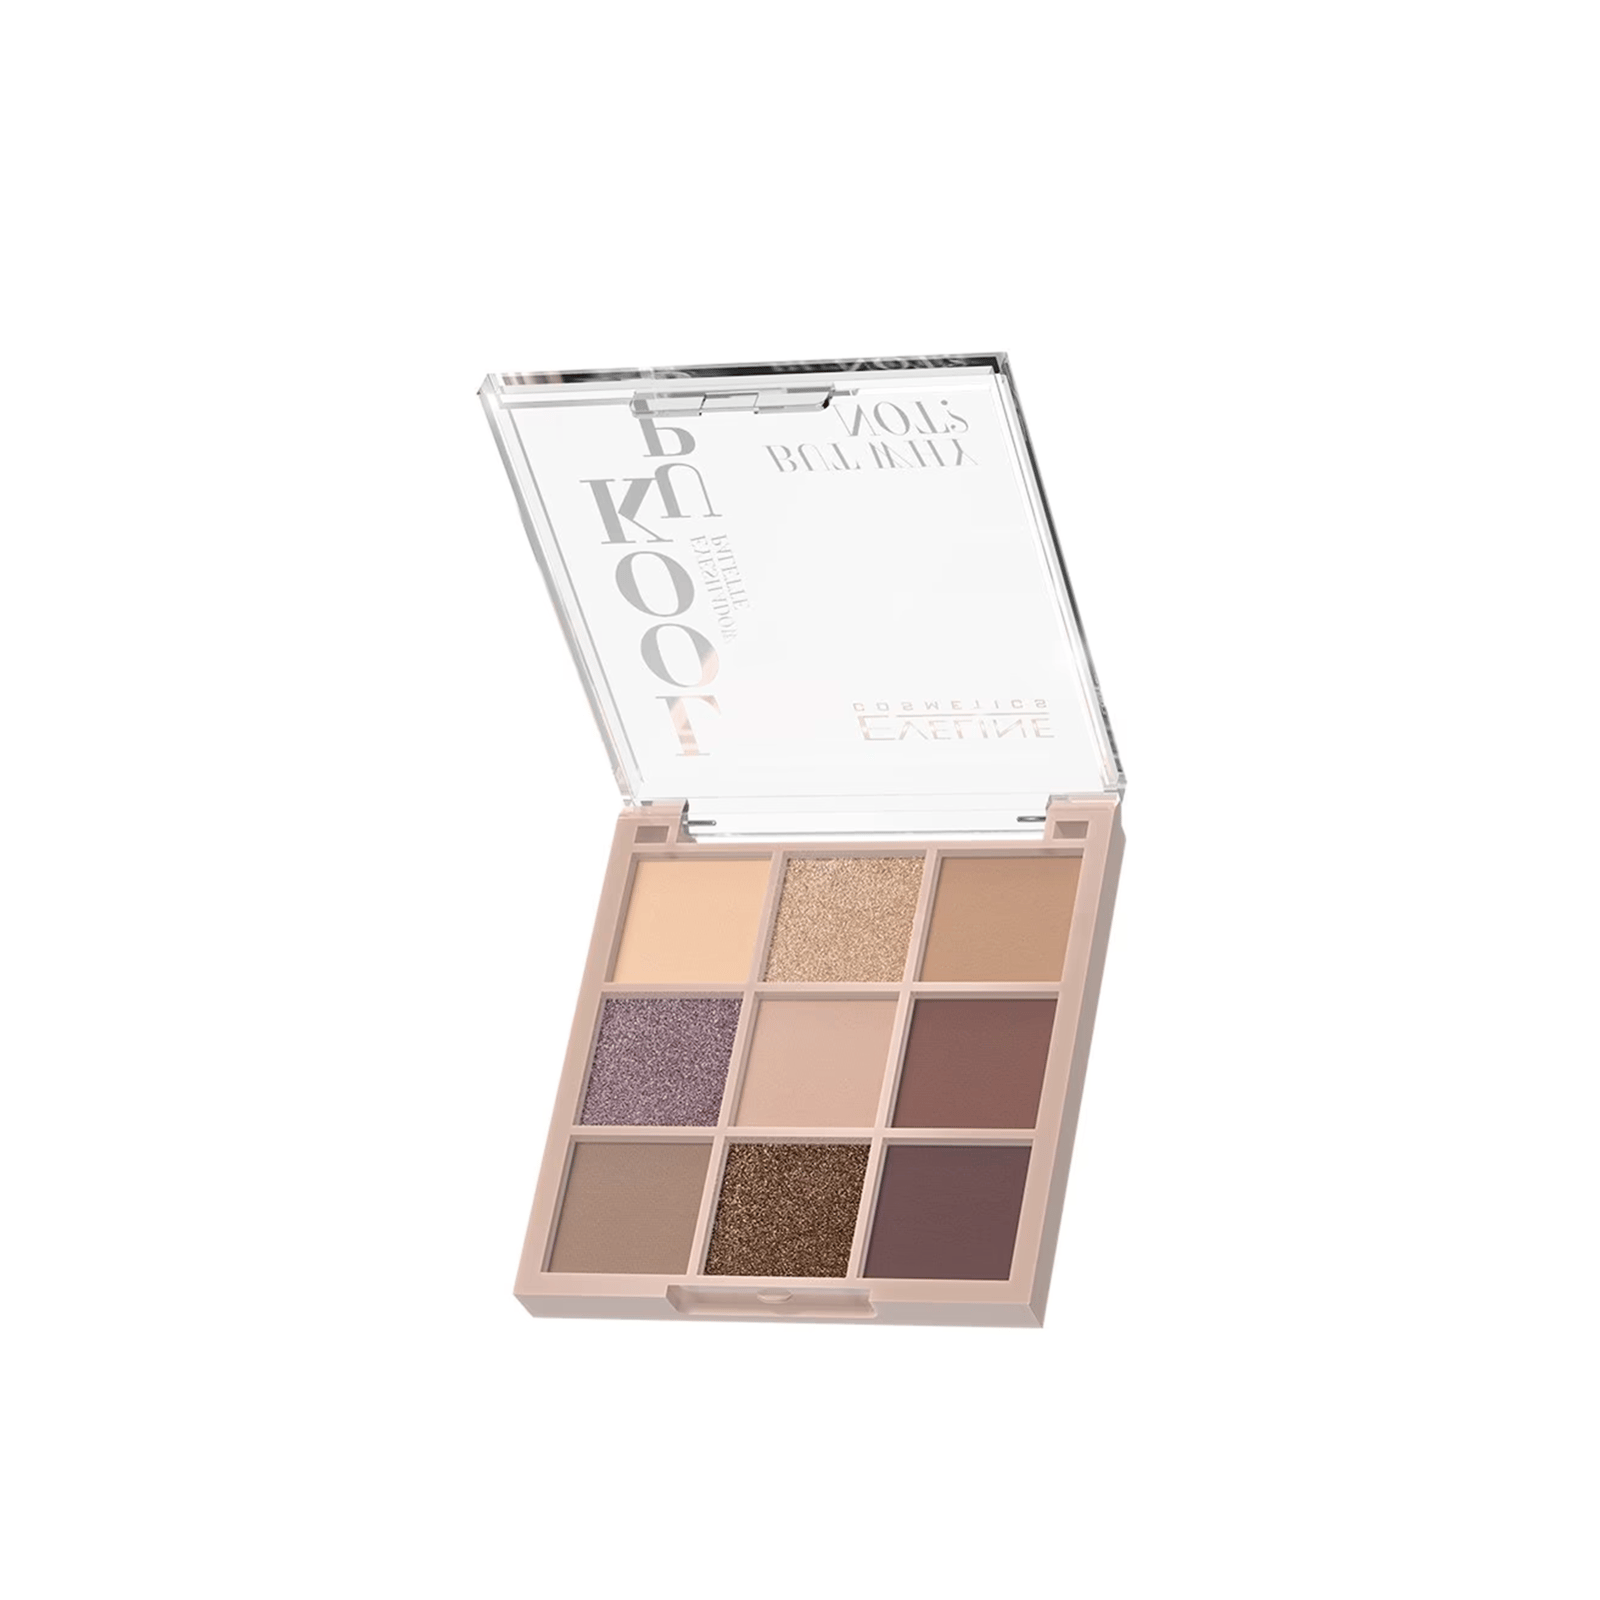 Eveline Cosmetics Look Up Eyeshadow Palette But Why Not? 10.8g